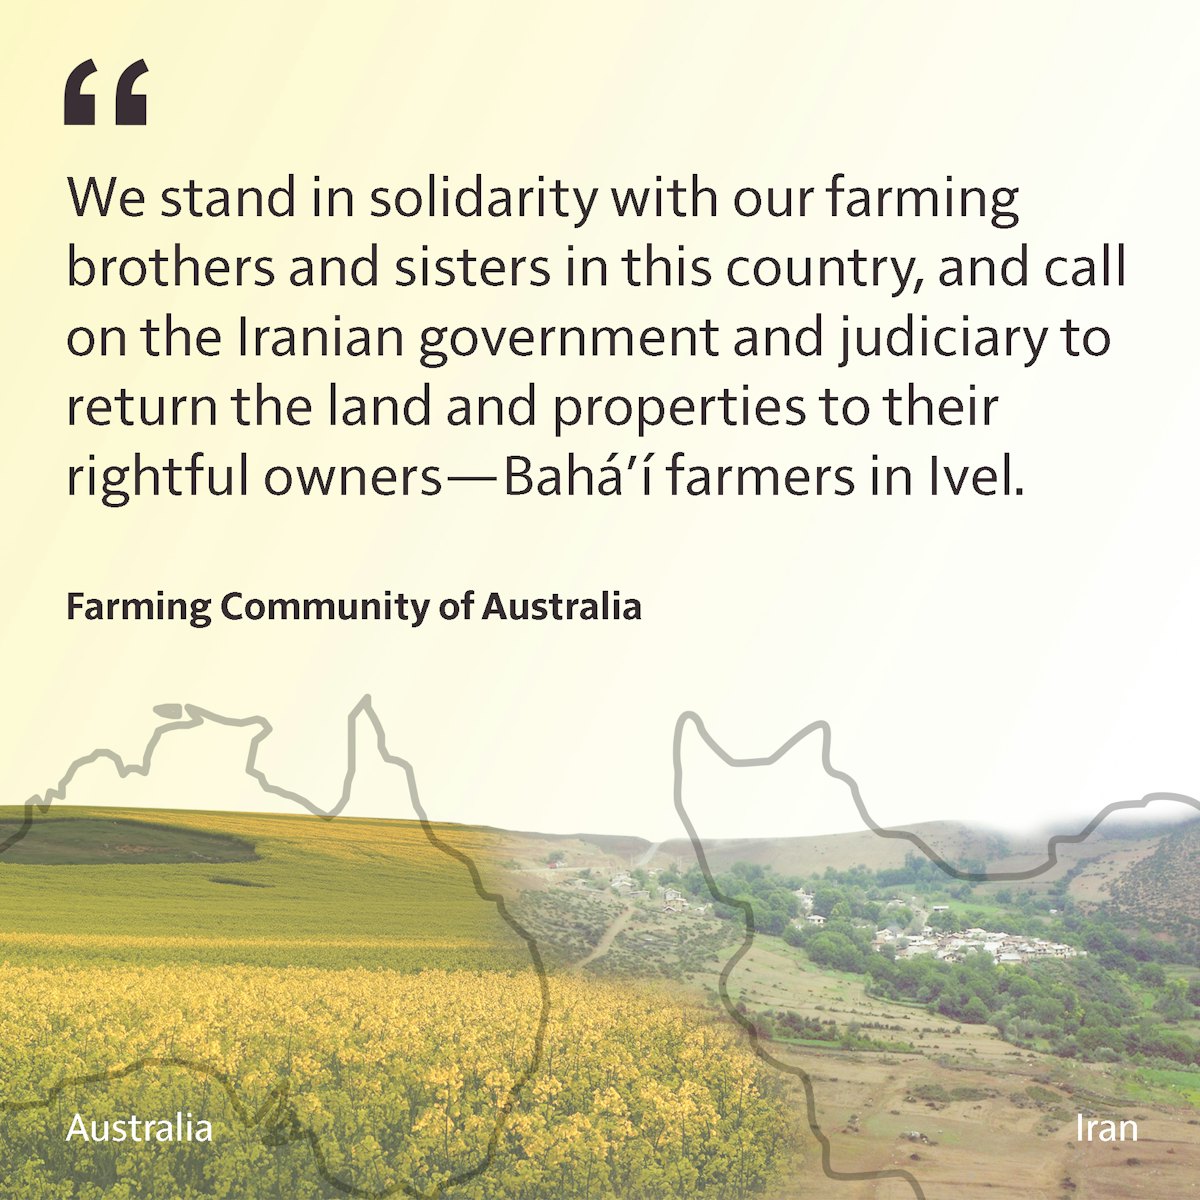 A video message released on behalf of members of Australia’s farming community describes the role of a supportive government in assisting its farming communities, drawing a sharp contrast with Iran’s harsh treatment of the country’s “peaceful Bahá’í community.”